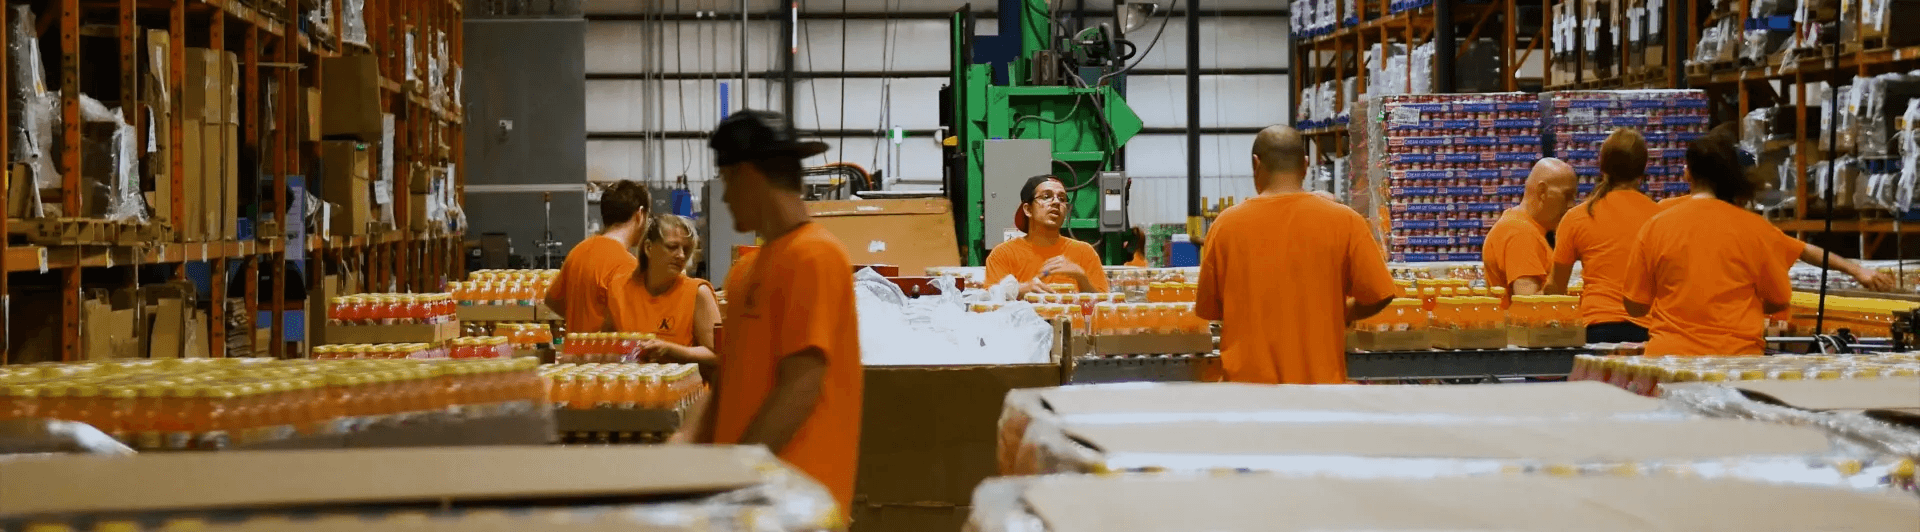 employees working on packaging bottle products